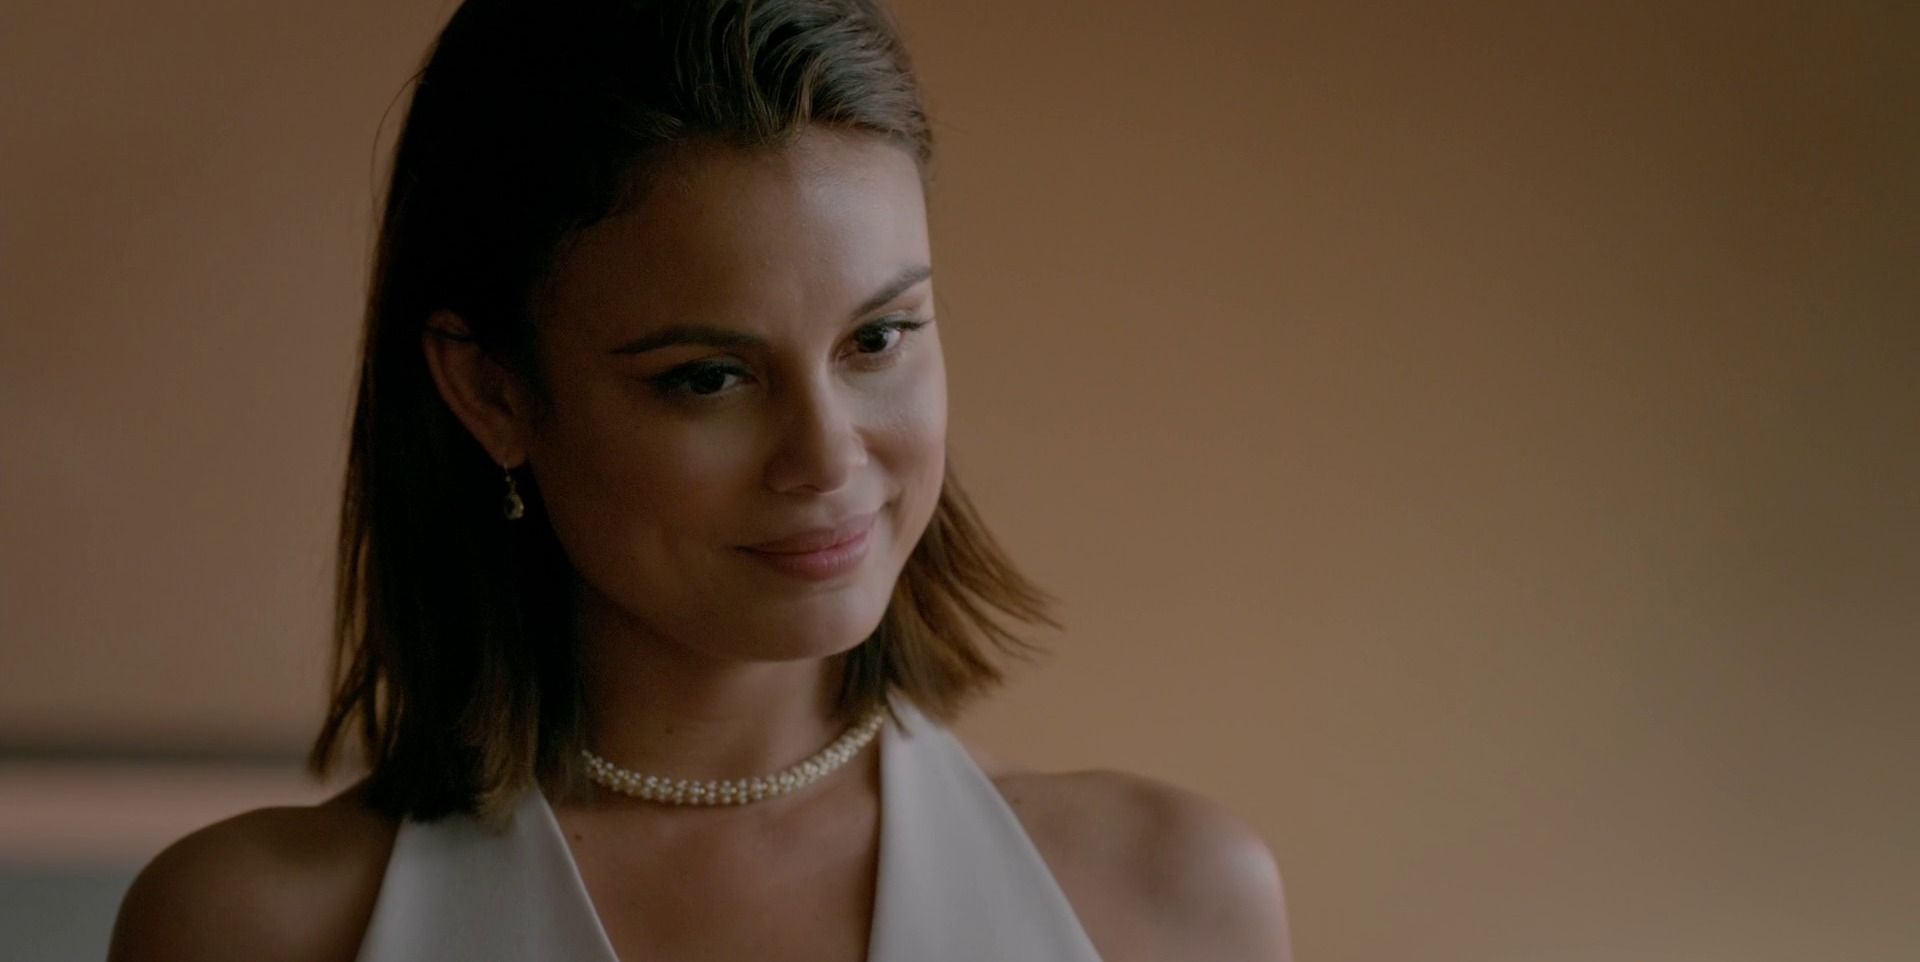 Sybil smiling and looking pleased in The Vampire Diaries.